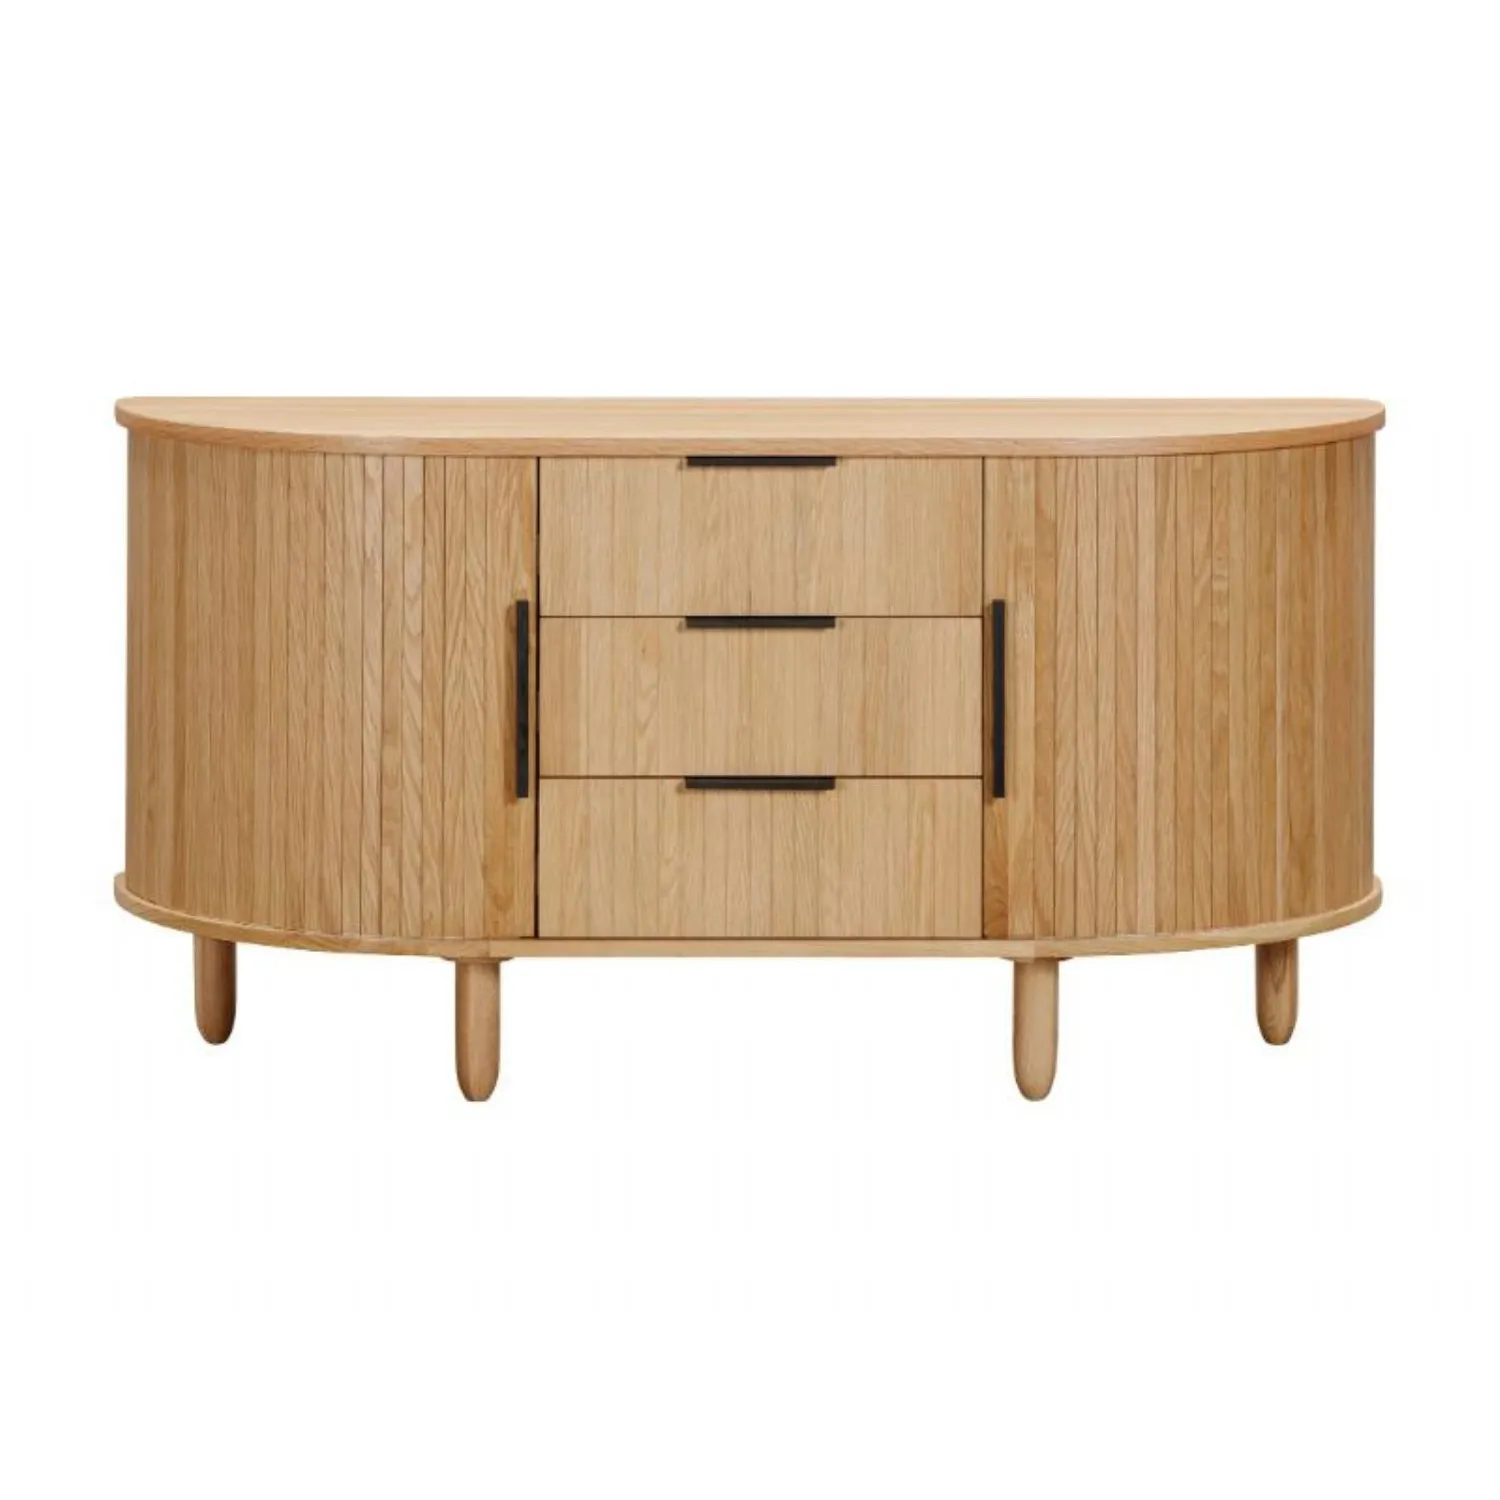 Vermont Large Curved Sideboard